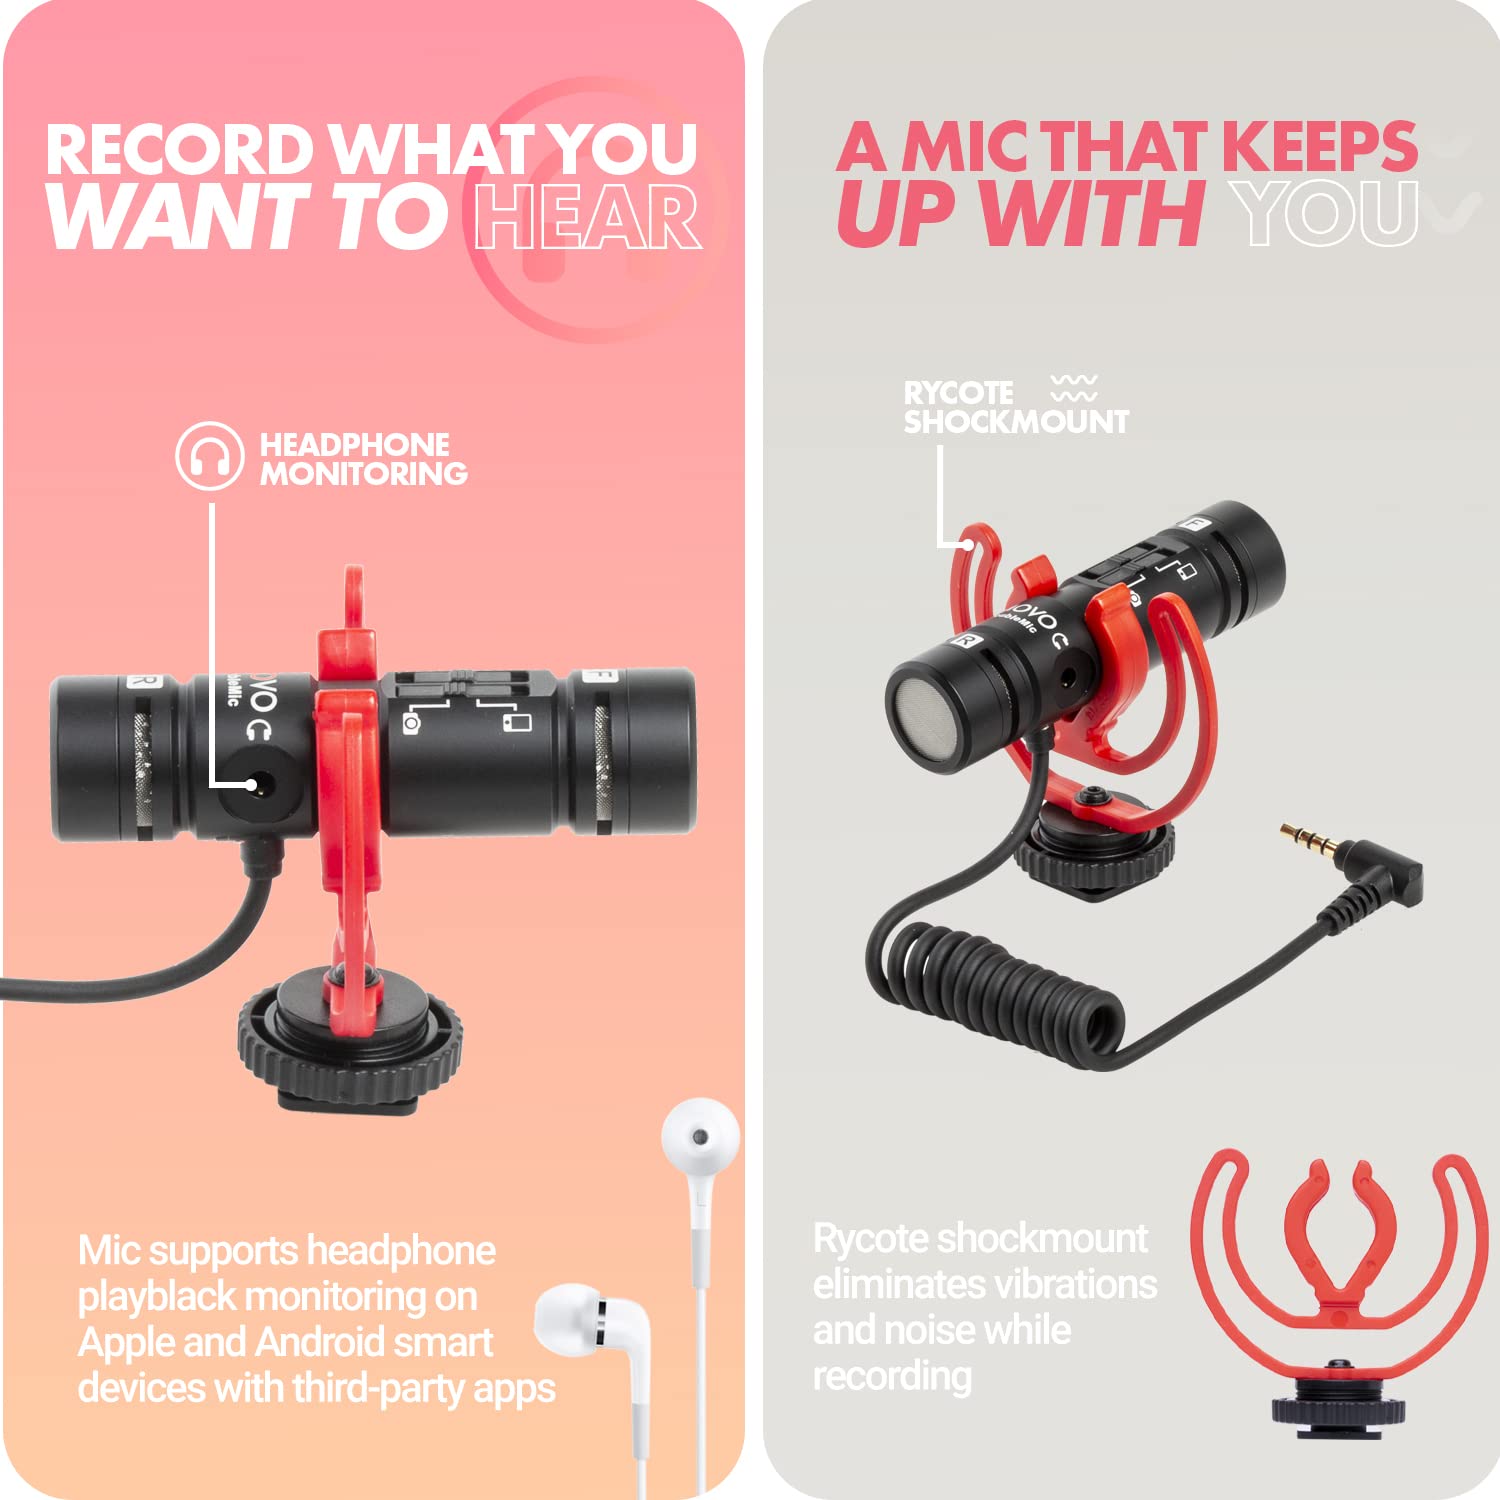 Movo DoubleMic V2 Two-Sided Shotgun Mic for Camera Vlogging - Dual Capsule External Microphone for iPhone, Android, Smartphones and DSLR Camcorders - Improved Wind Protection - Latest Version  - Acceptable